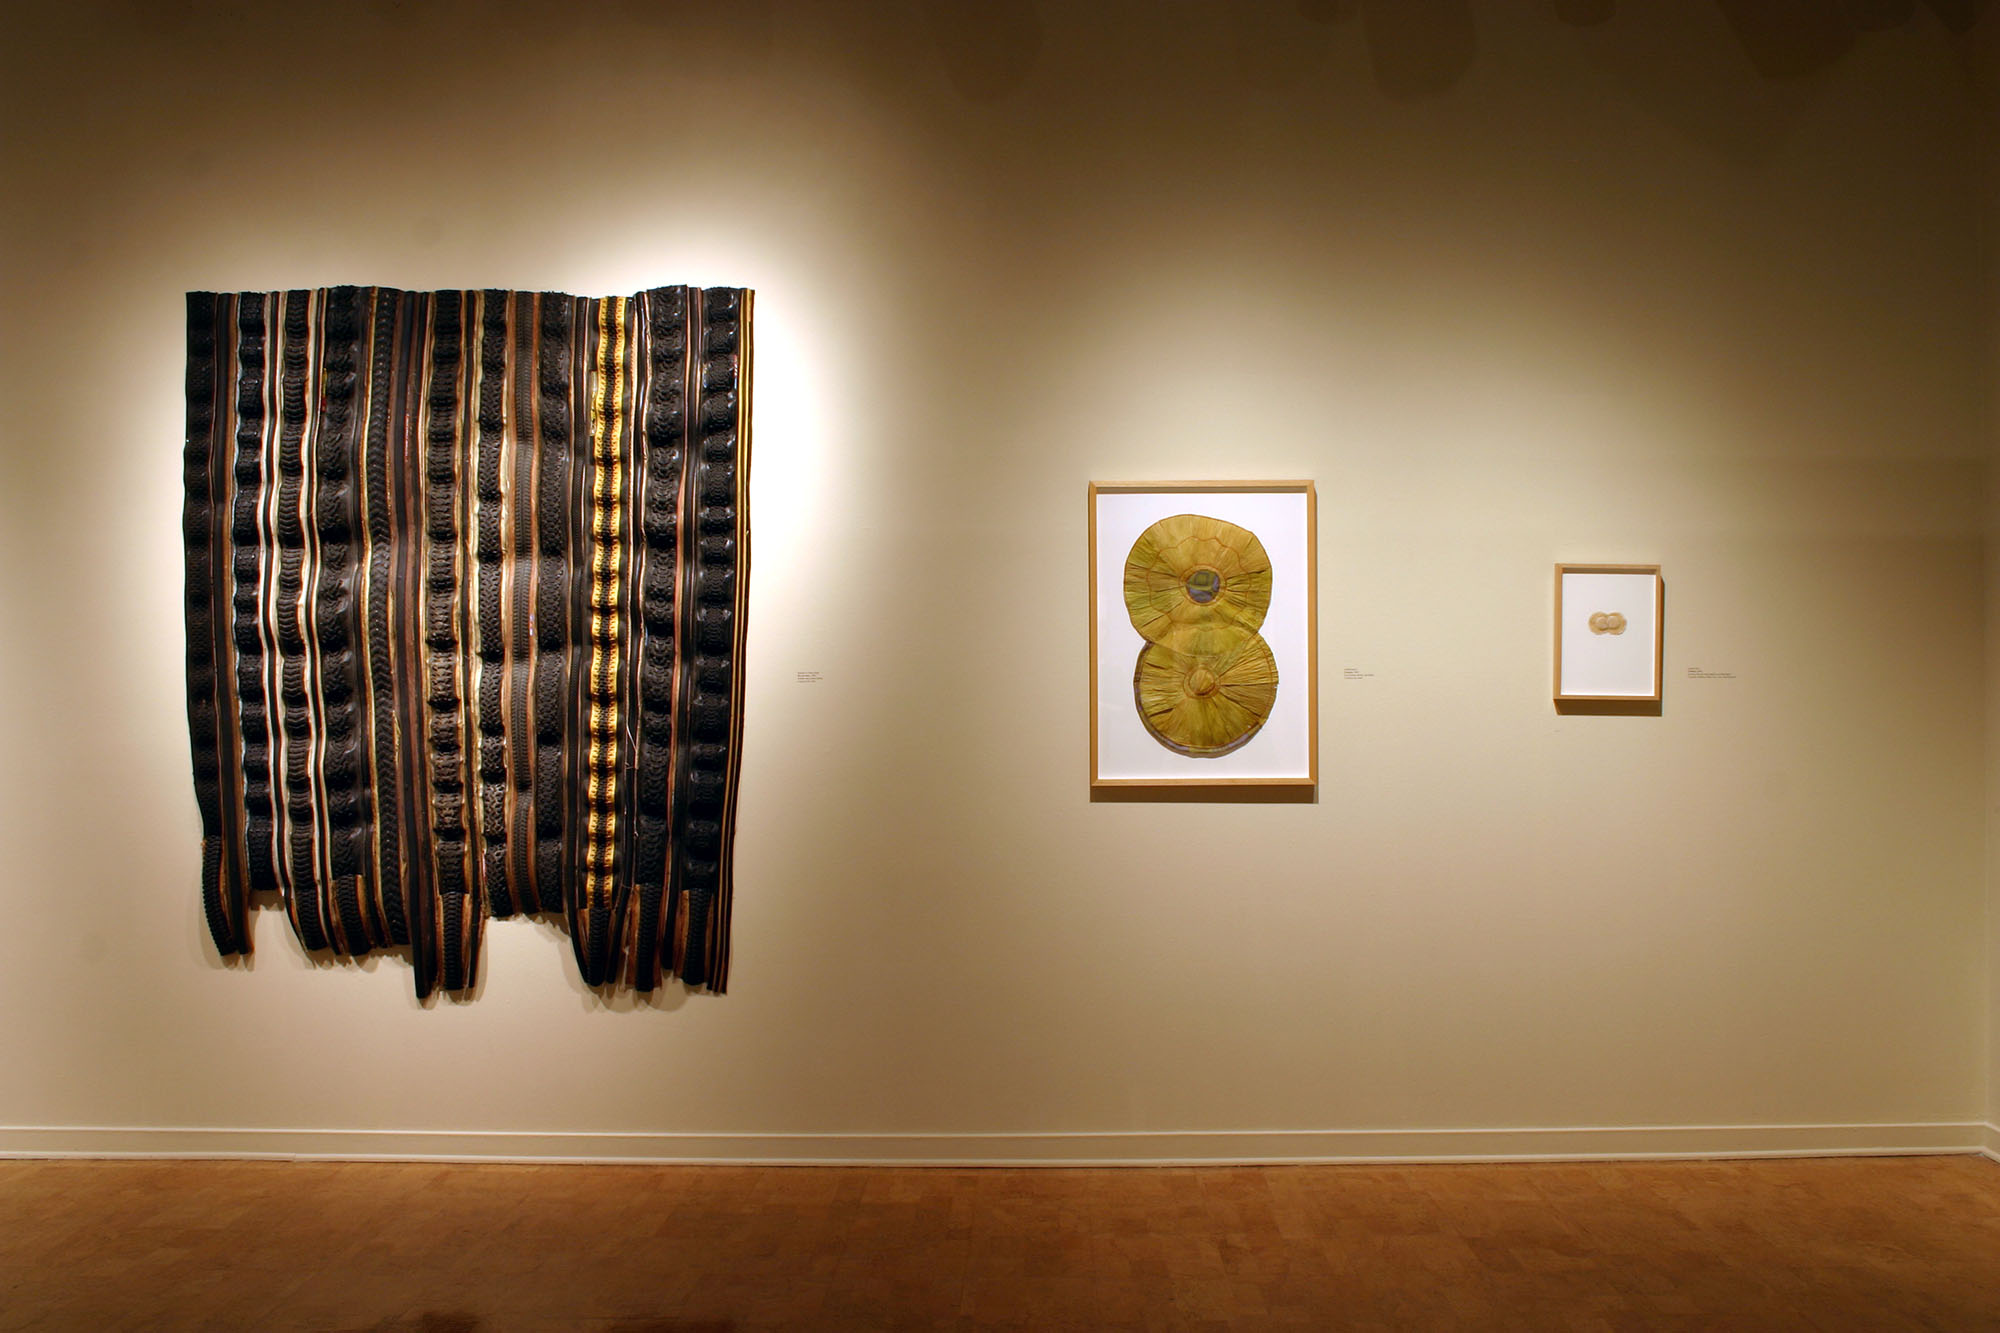 Installation view at the DePaul University Art Gallery